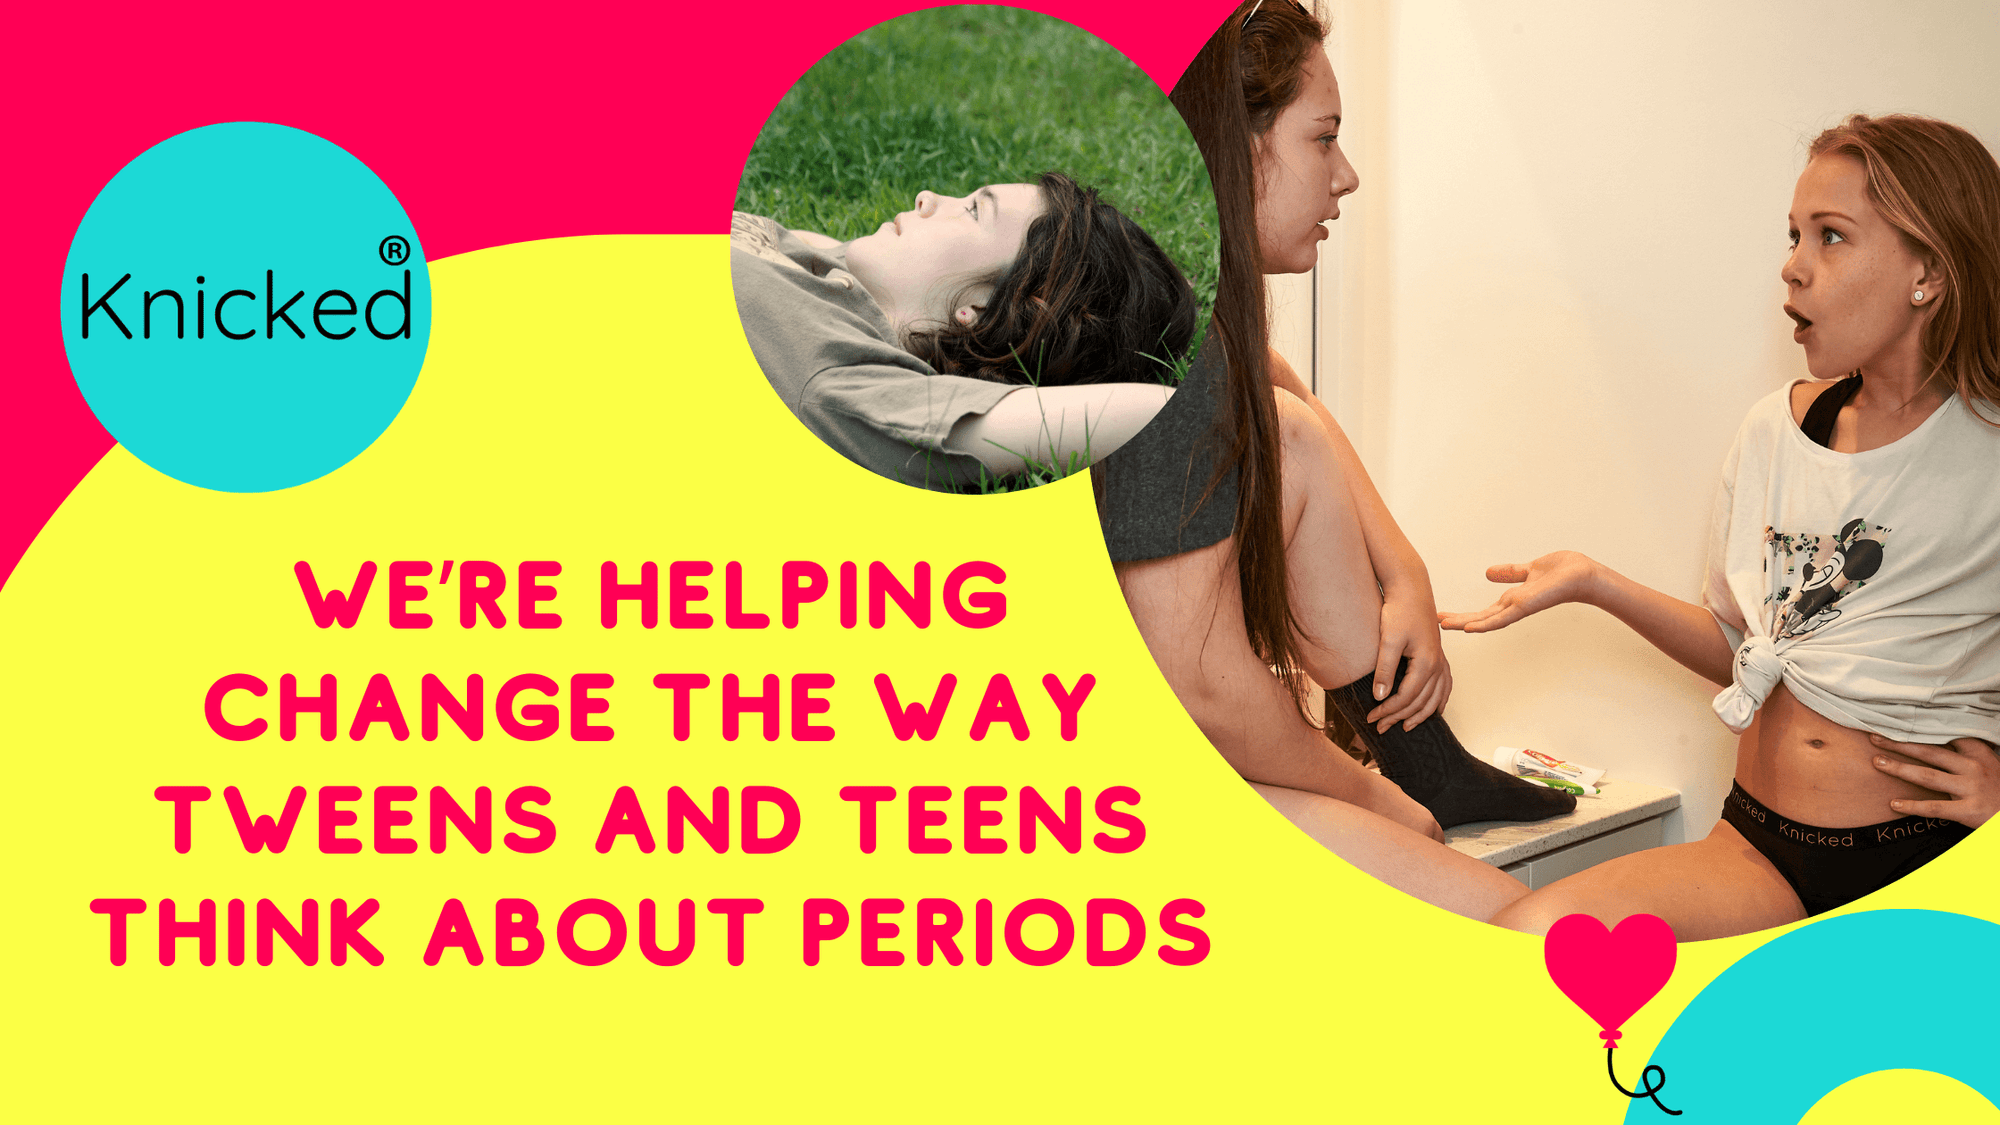 Changing the way tweens and teens think about periods! - Knicked